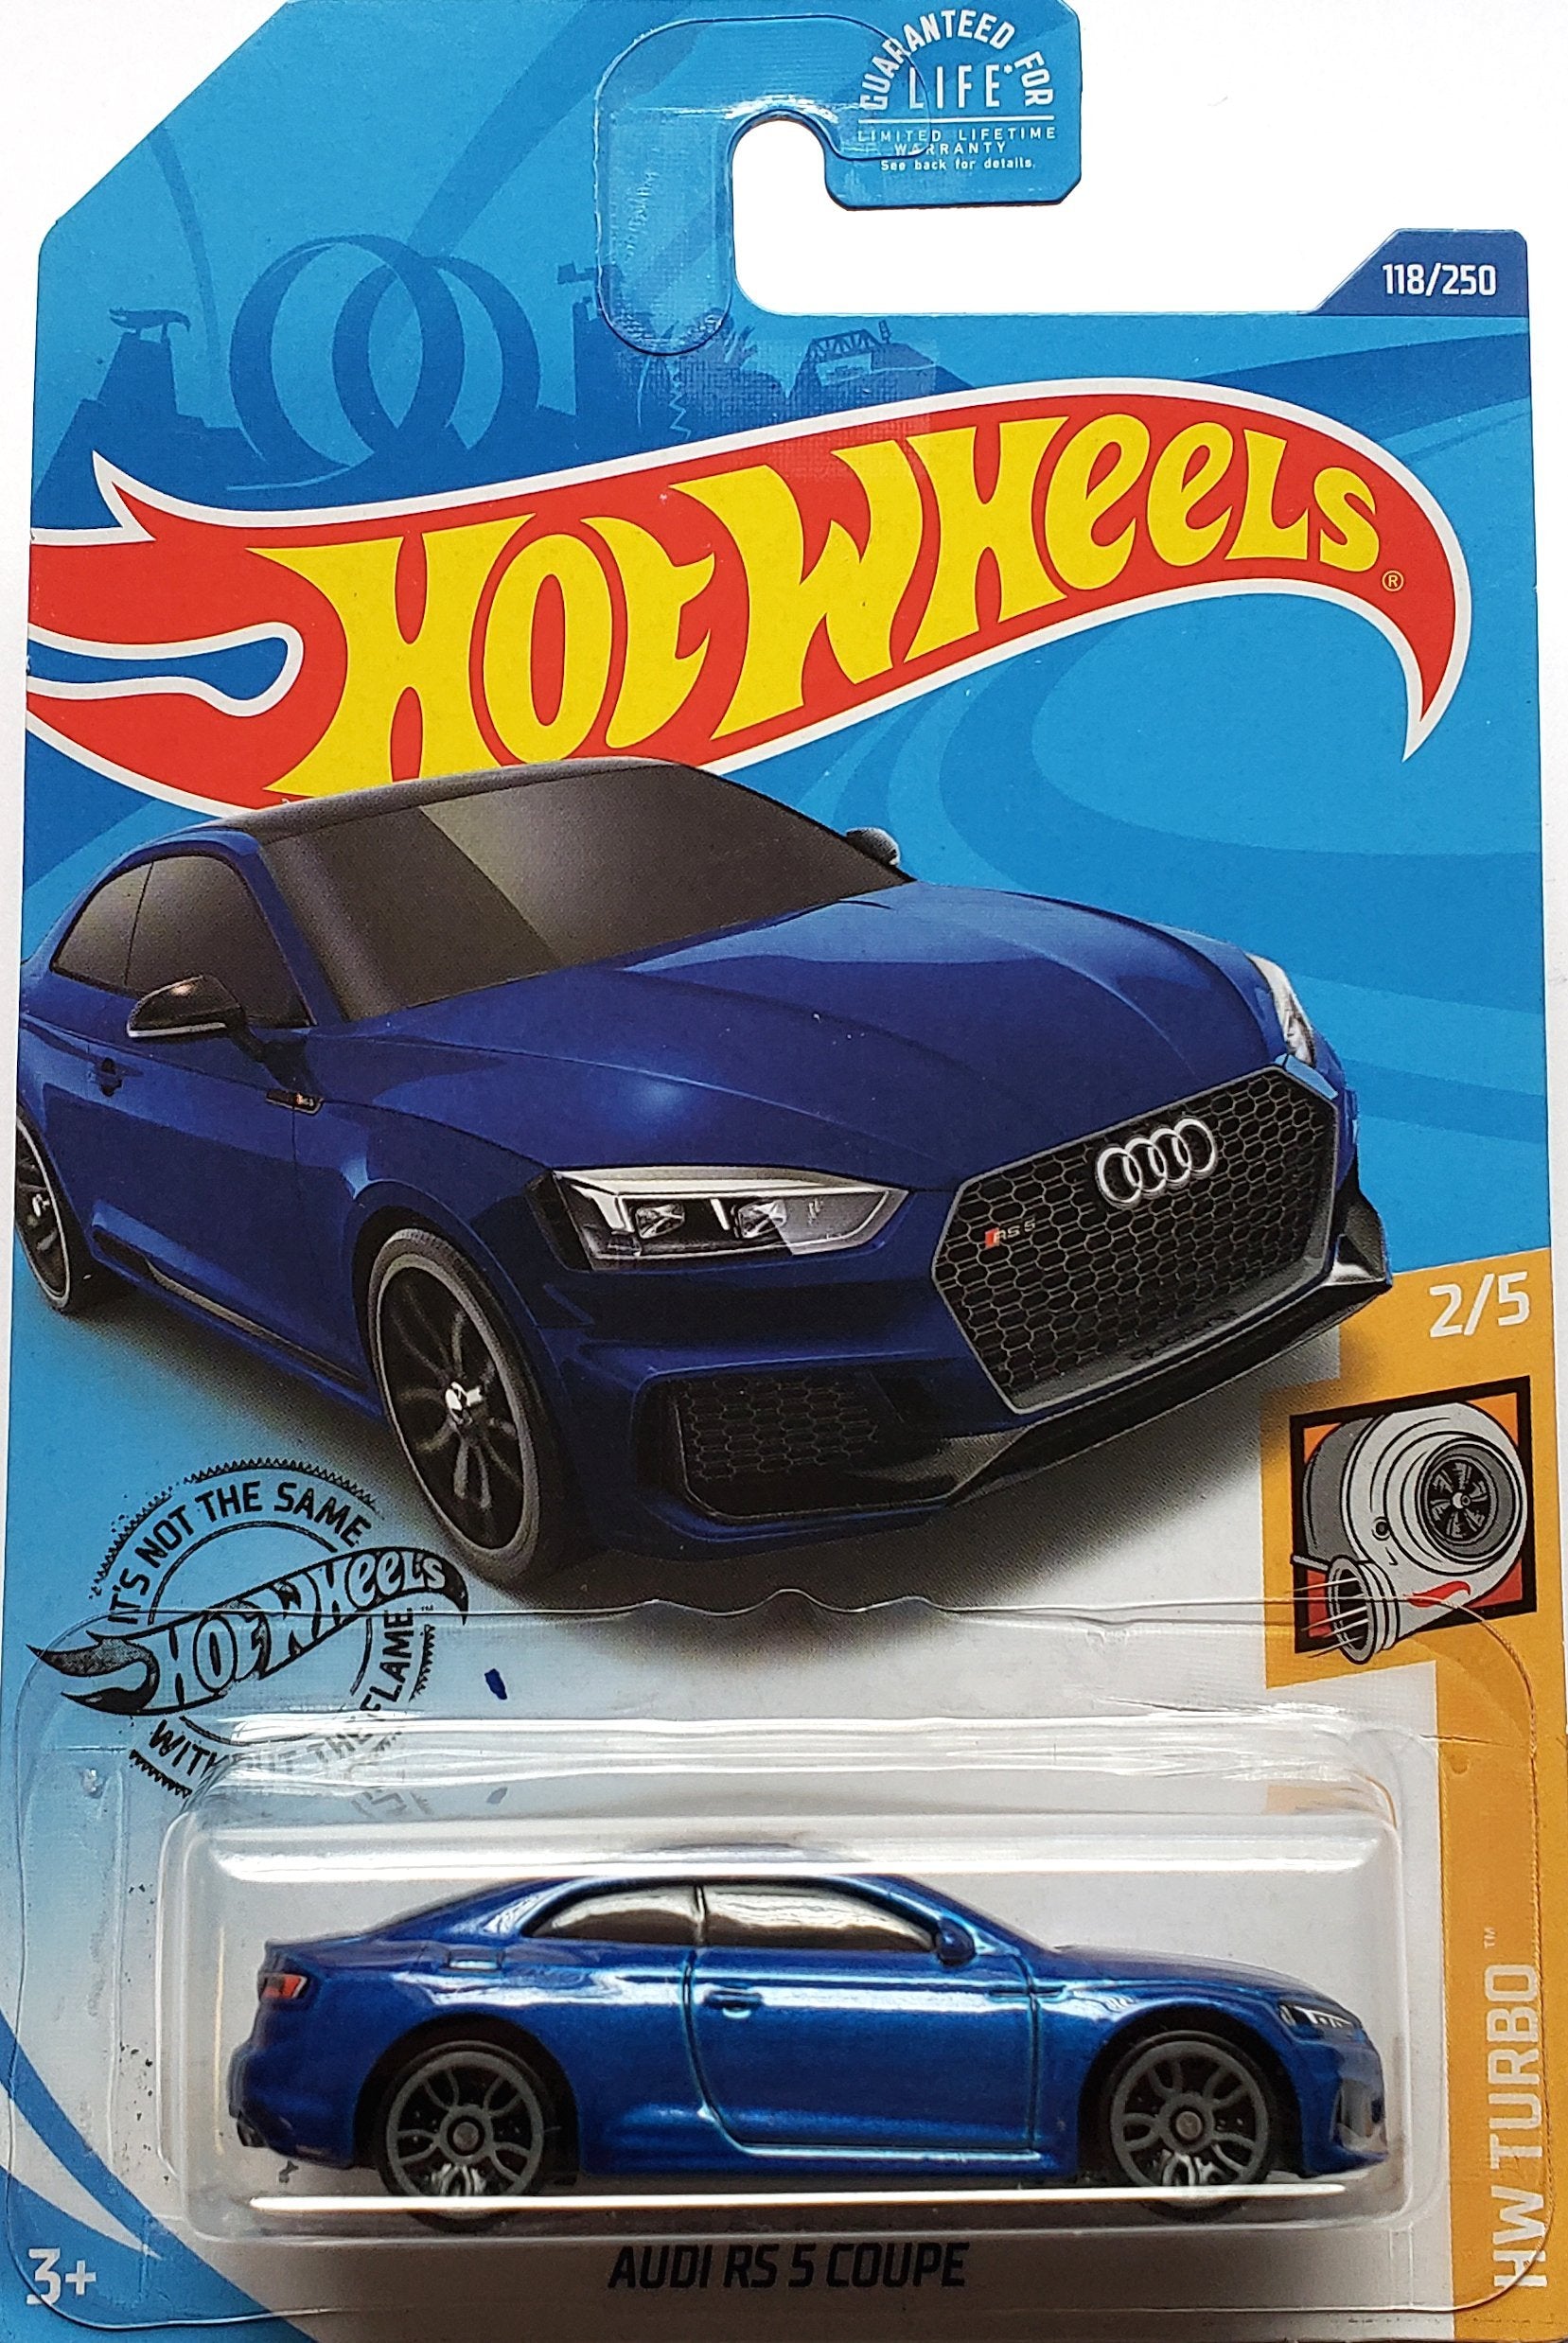 2020 Hot Wheels Mainline #118 - Audi RS 5 Coupe (Blue) GHD00